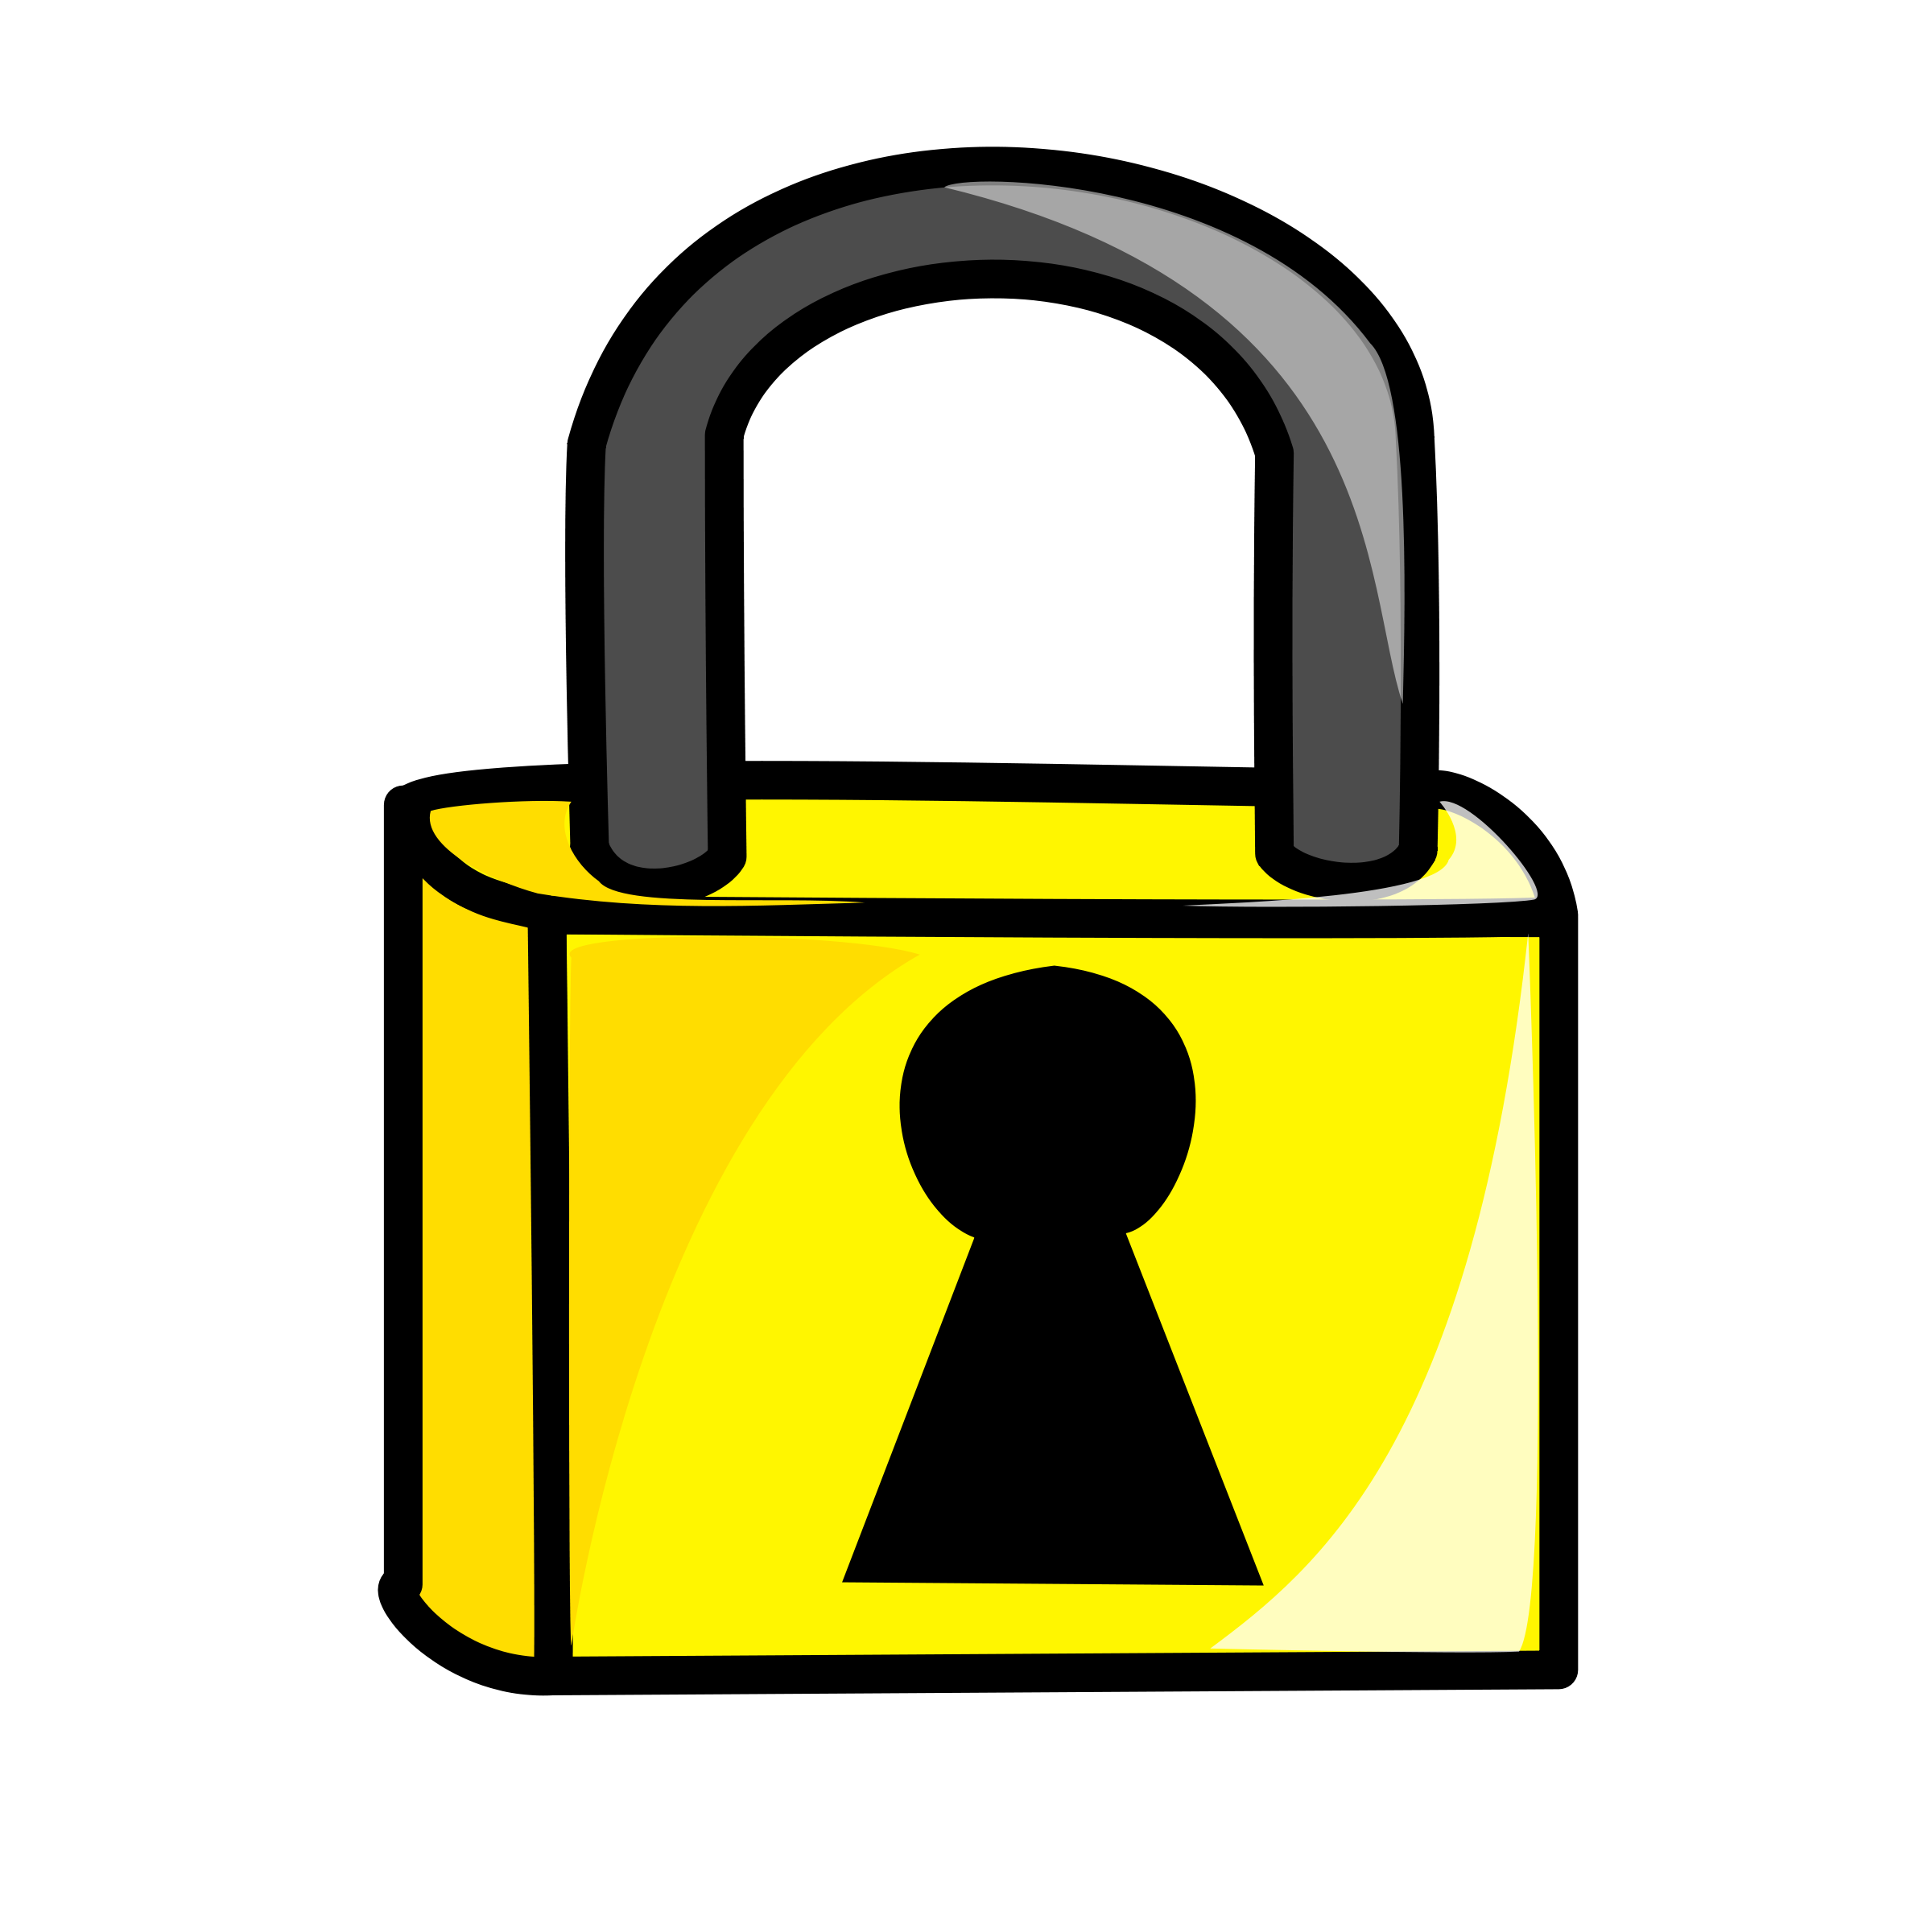 Security Clipart Royalty Free